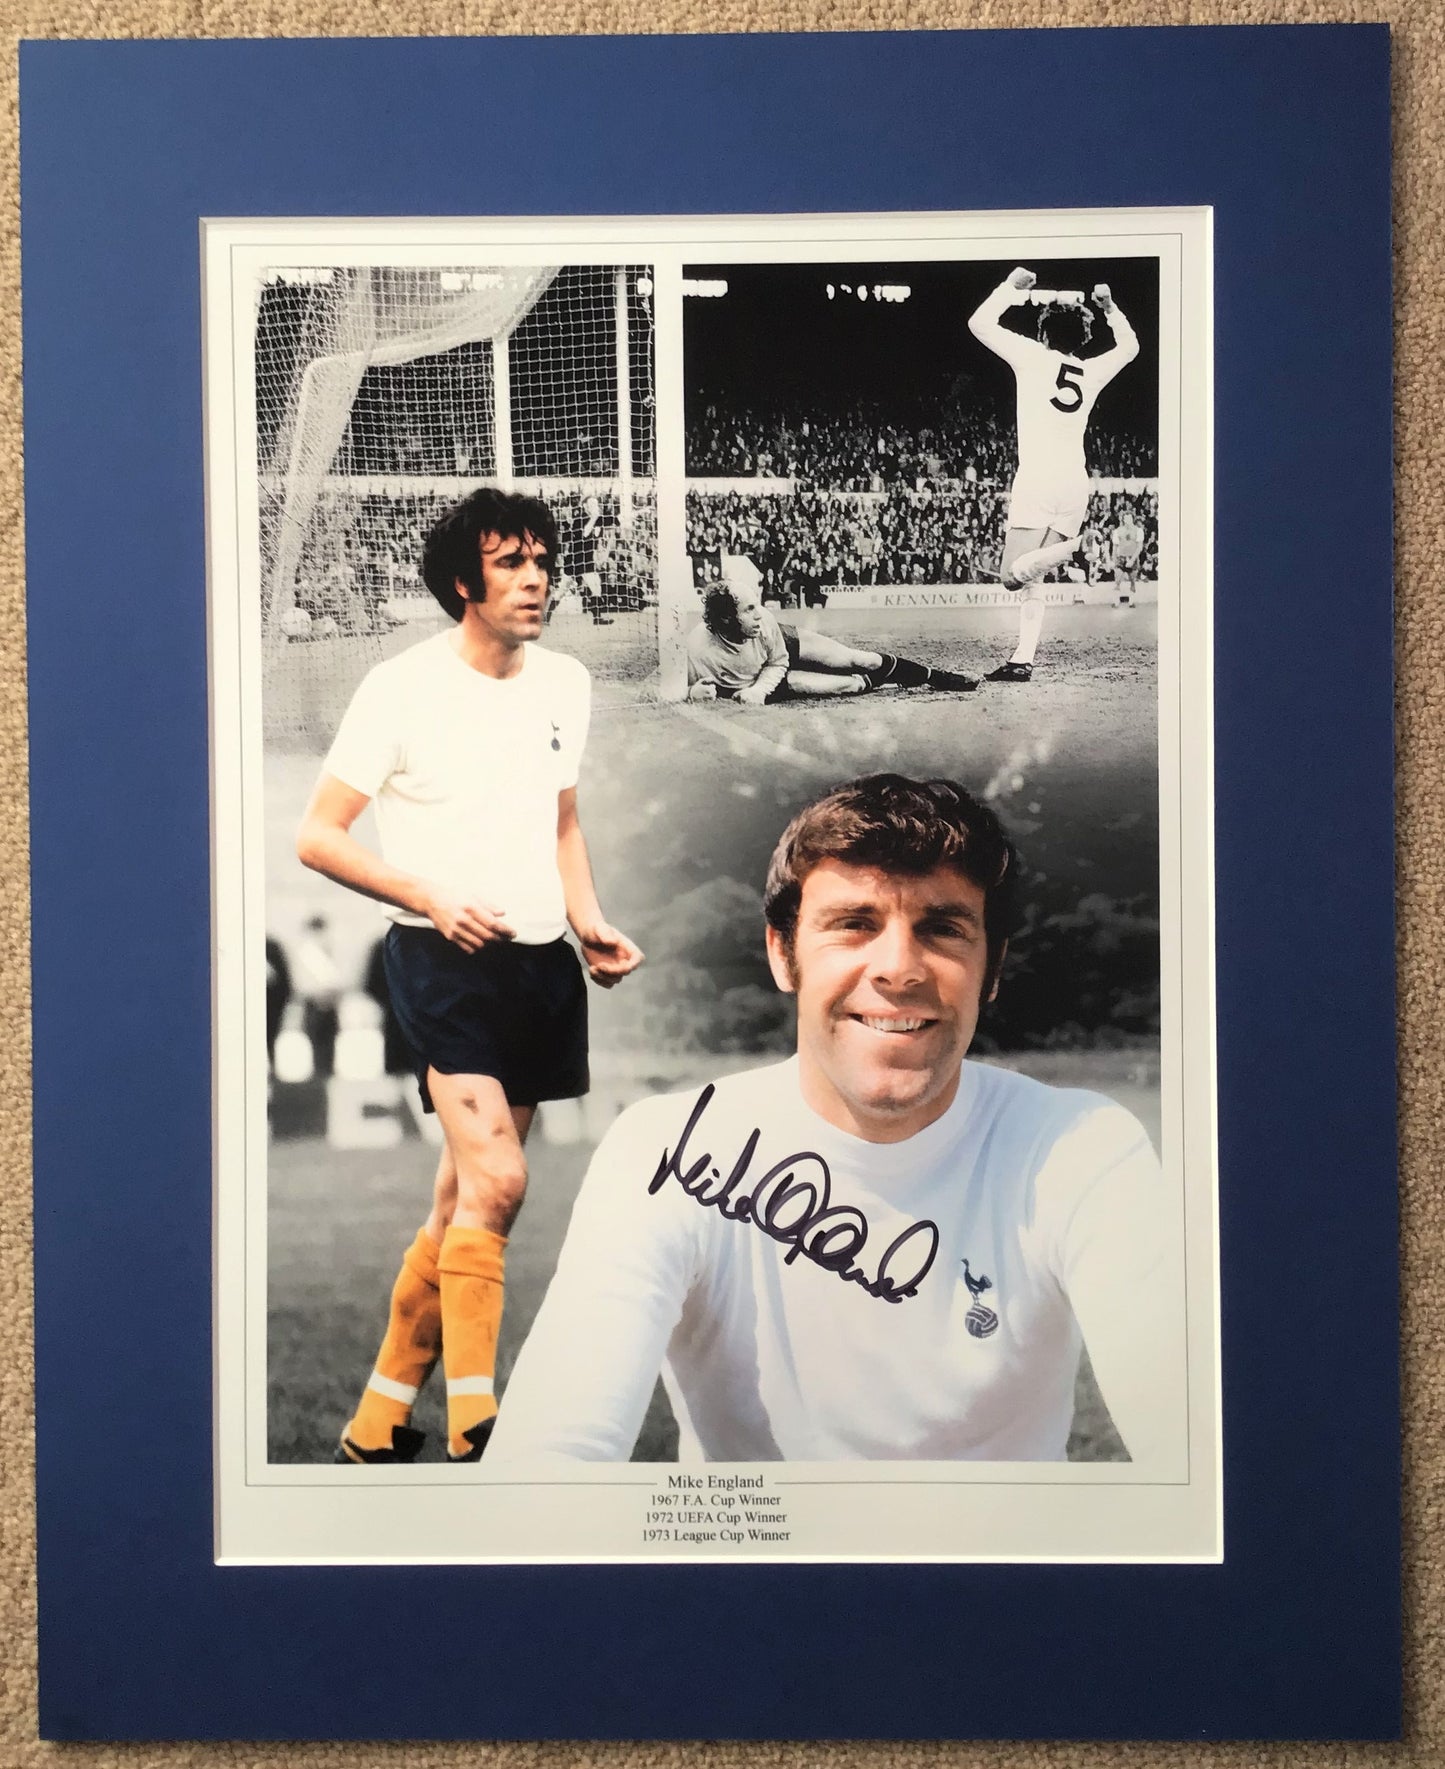 Mike England - Tottenham Hotspur FC - 20x16in signed photo mount- THFC memorabilia, gift, display (UNFRAMED)